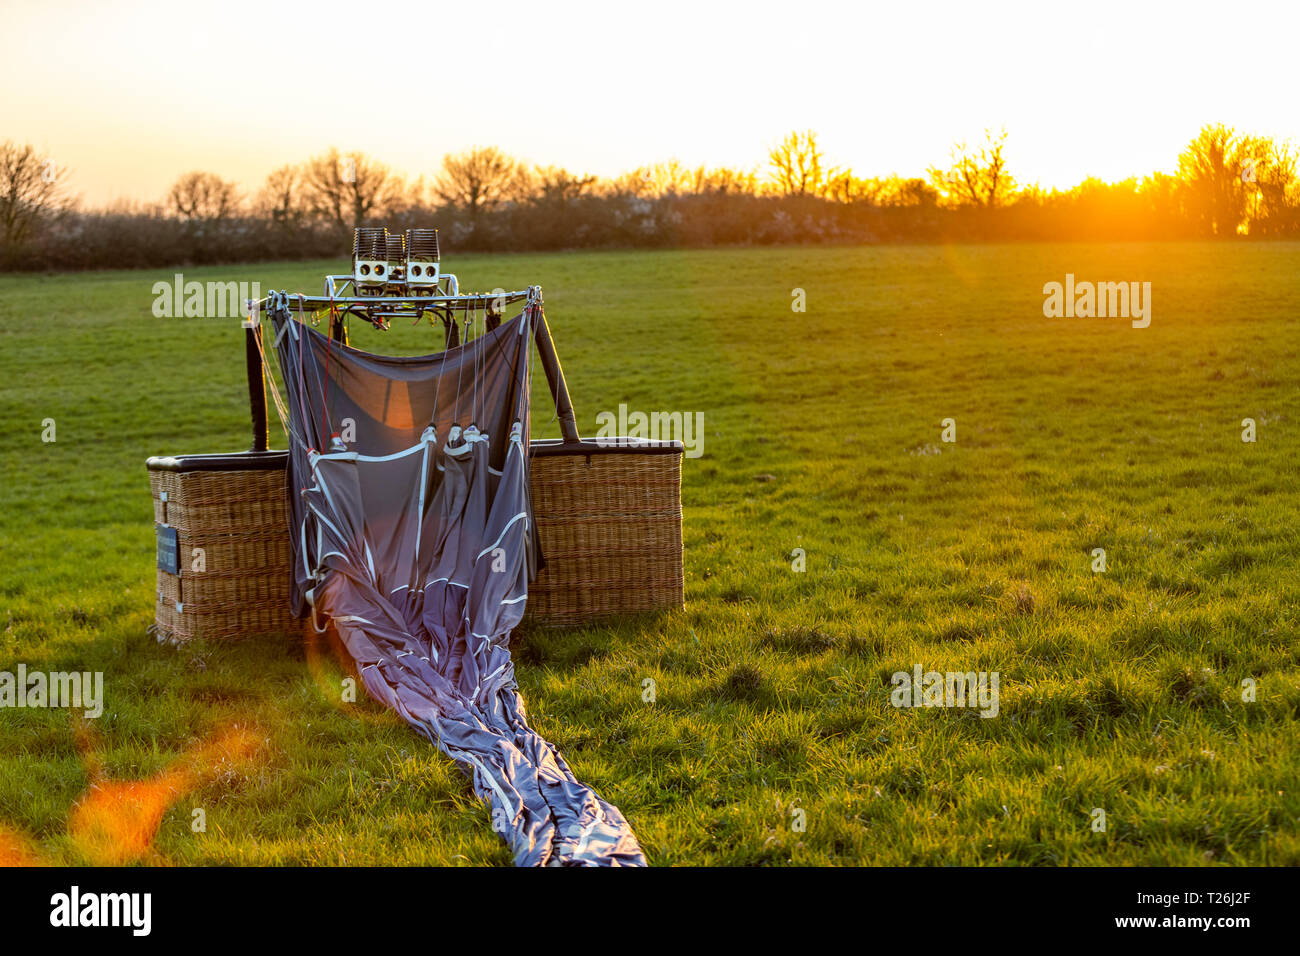 Hot air ballooning, Bristol. After an evening flight, the balloon once deflated needs to be packed away by the passengers. Stock Photo